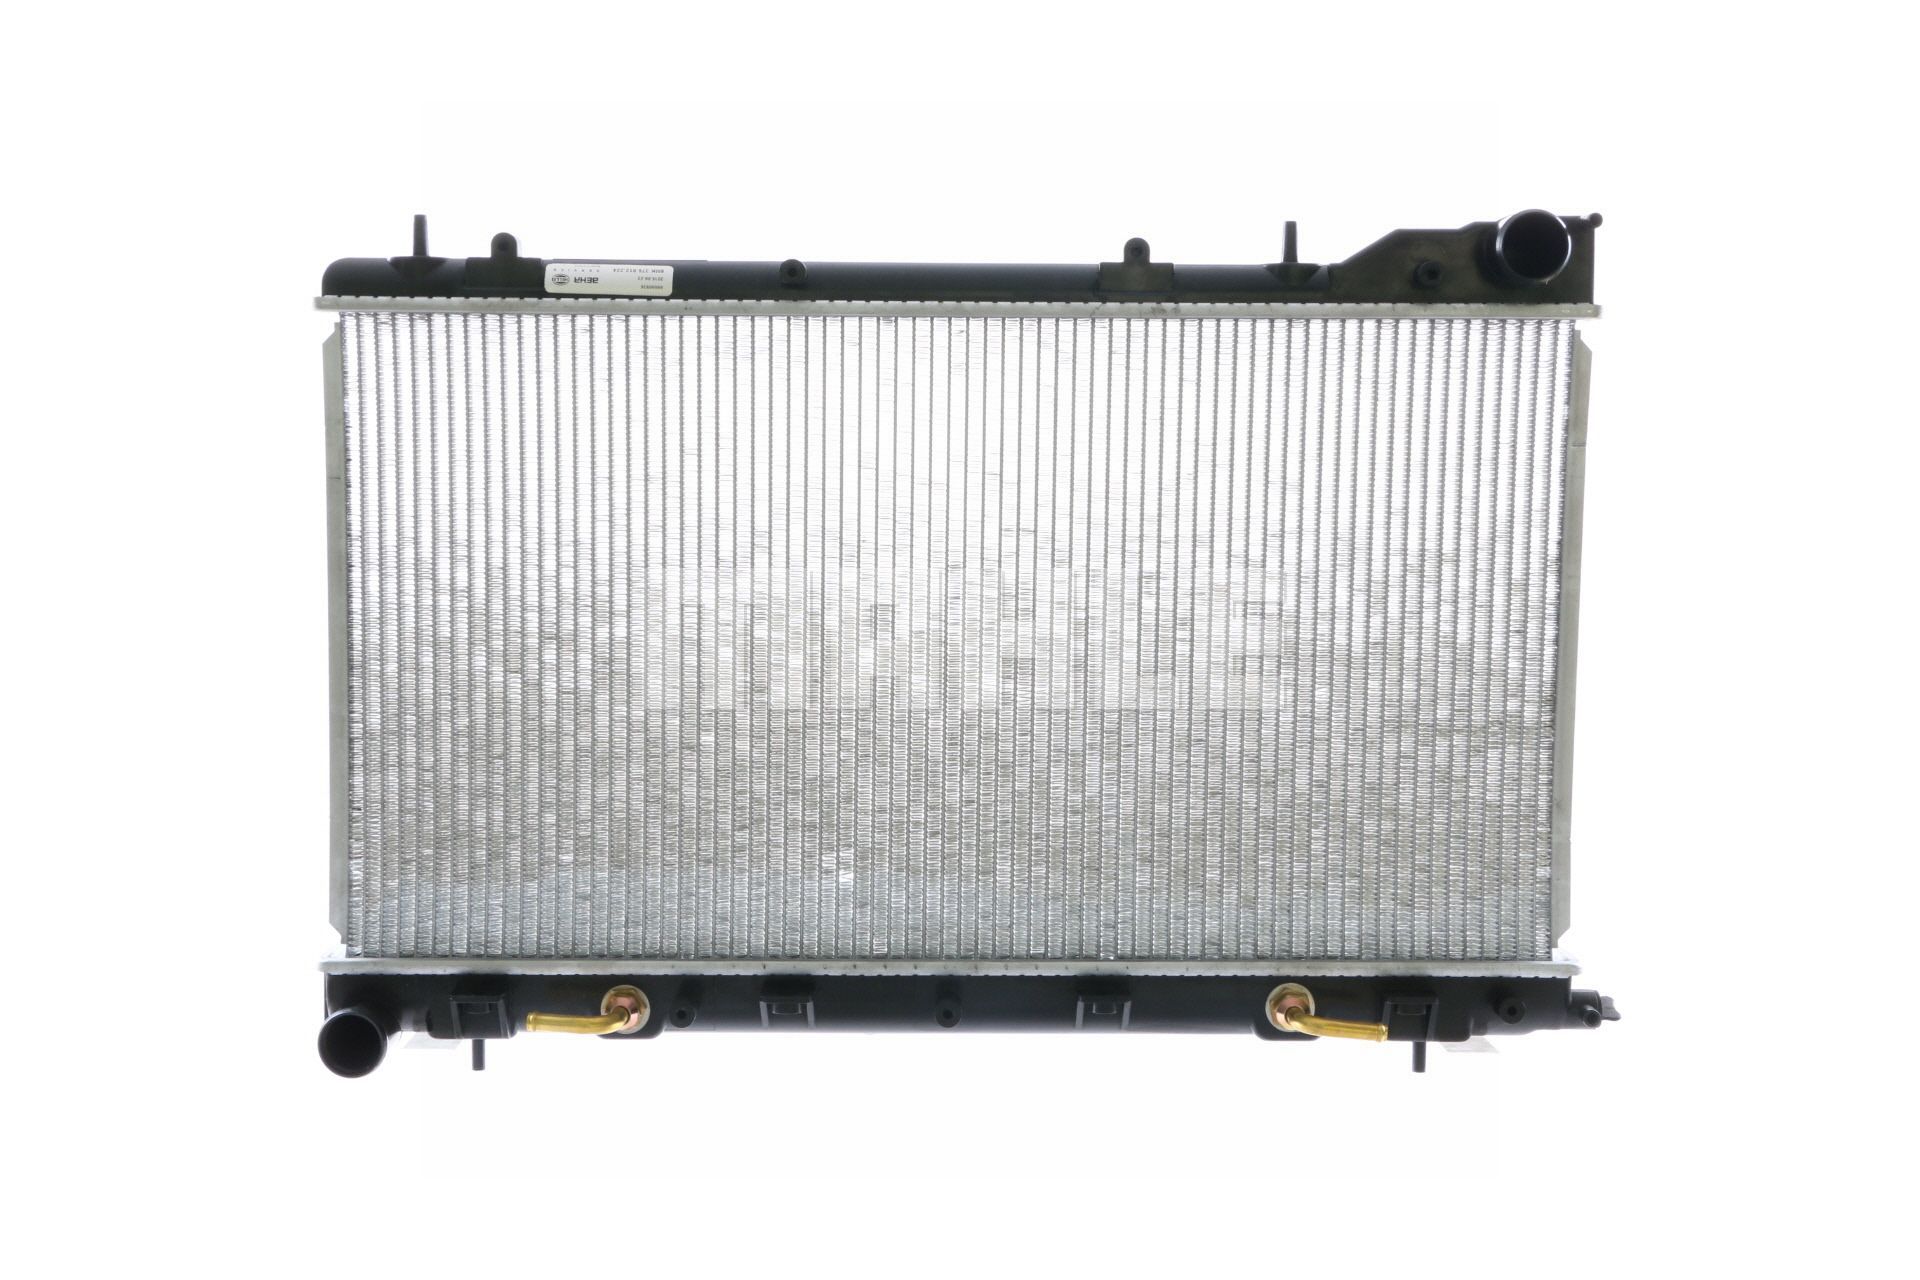 MAHLE ORIGINAL CR 2165 000S Engine radiator for vehicles without air conditioning, 360 x 688 x 16 mm, Manual-/optional automatic transmission, Brazed cooling fins